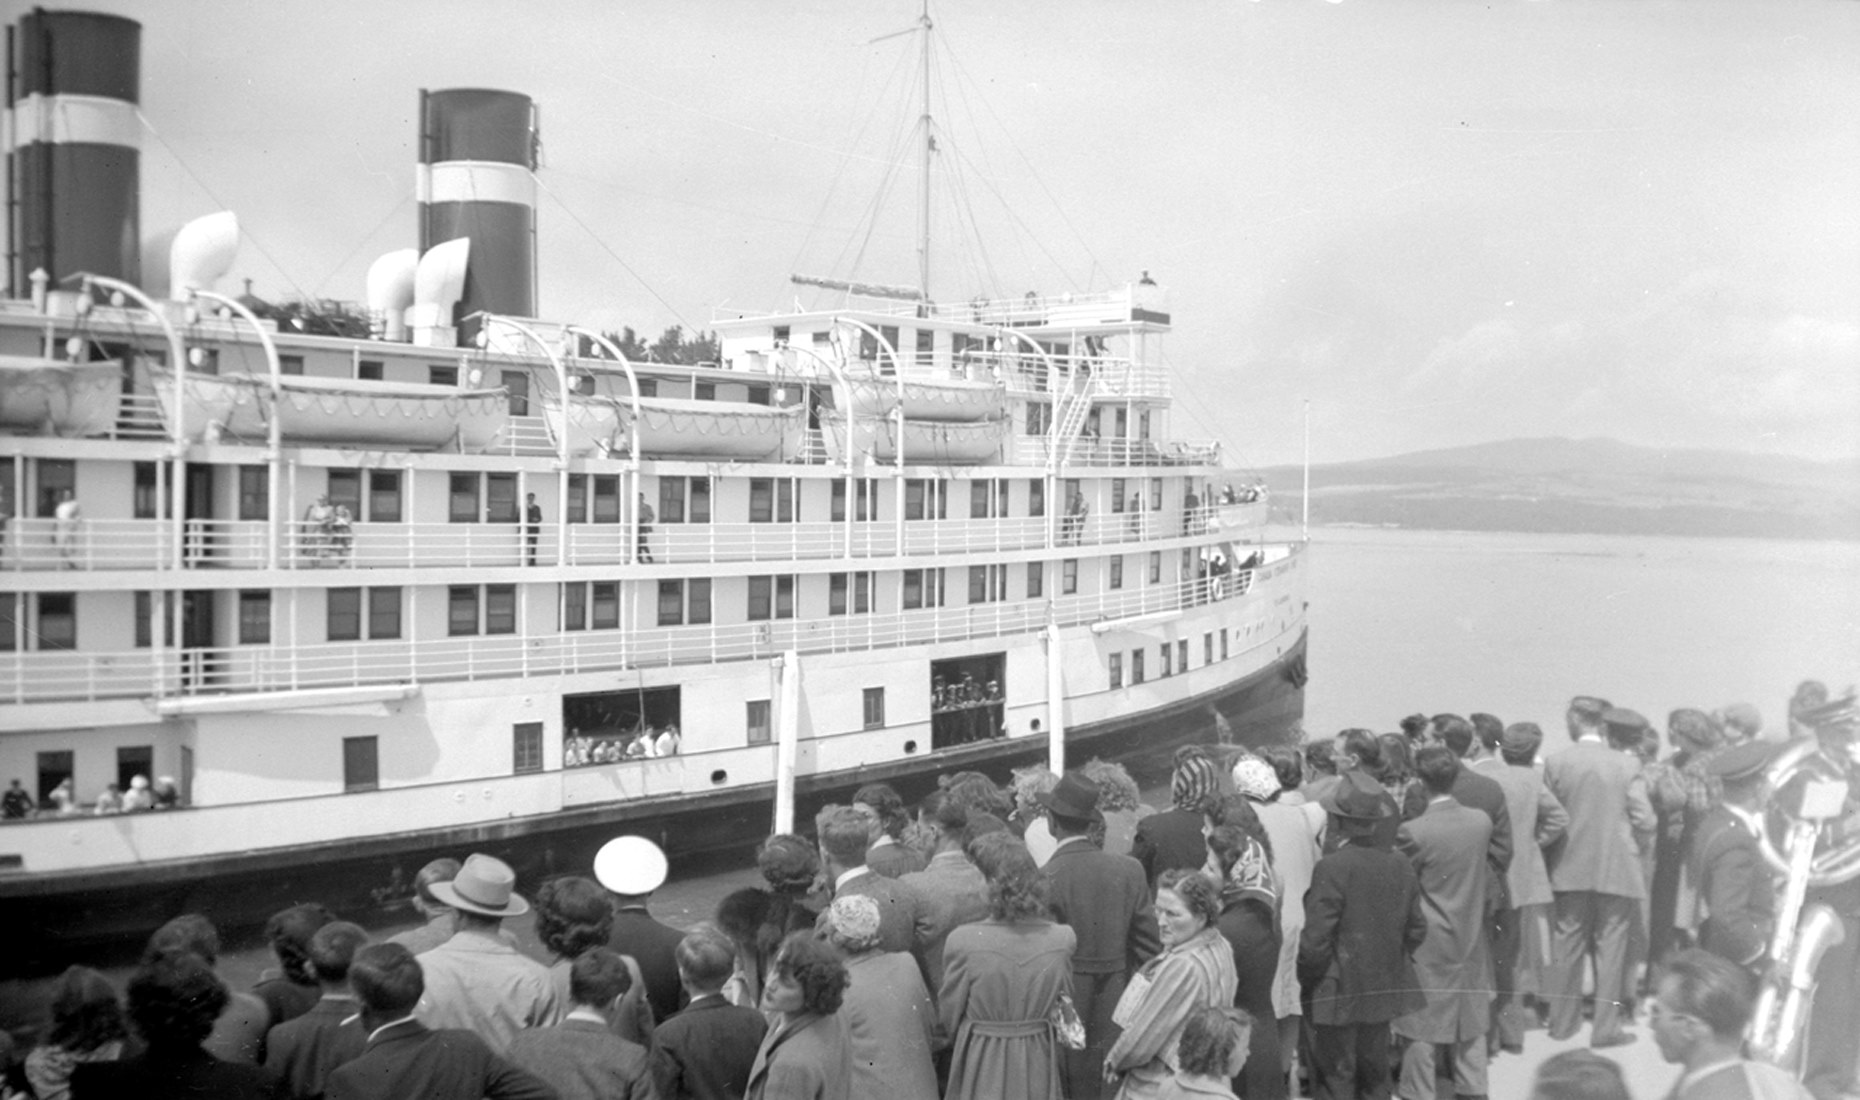 Dozens of passengers waiting on a wharf where a very large cruise steamer is moored.